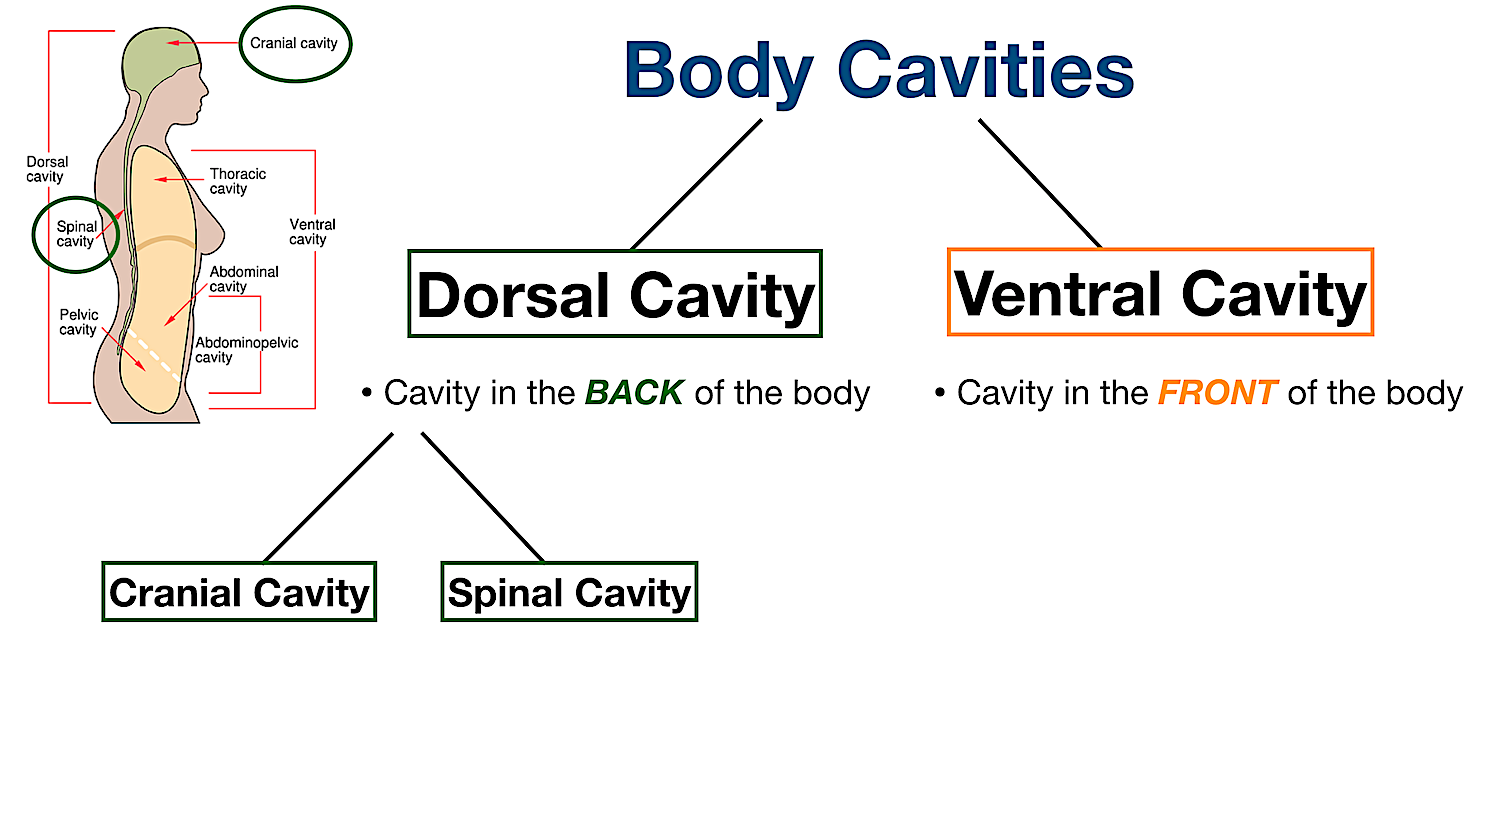 what is the importance of having a body cavity